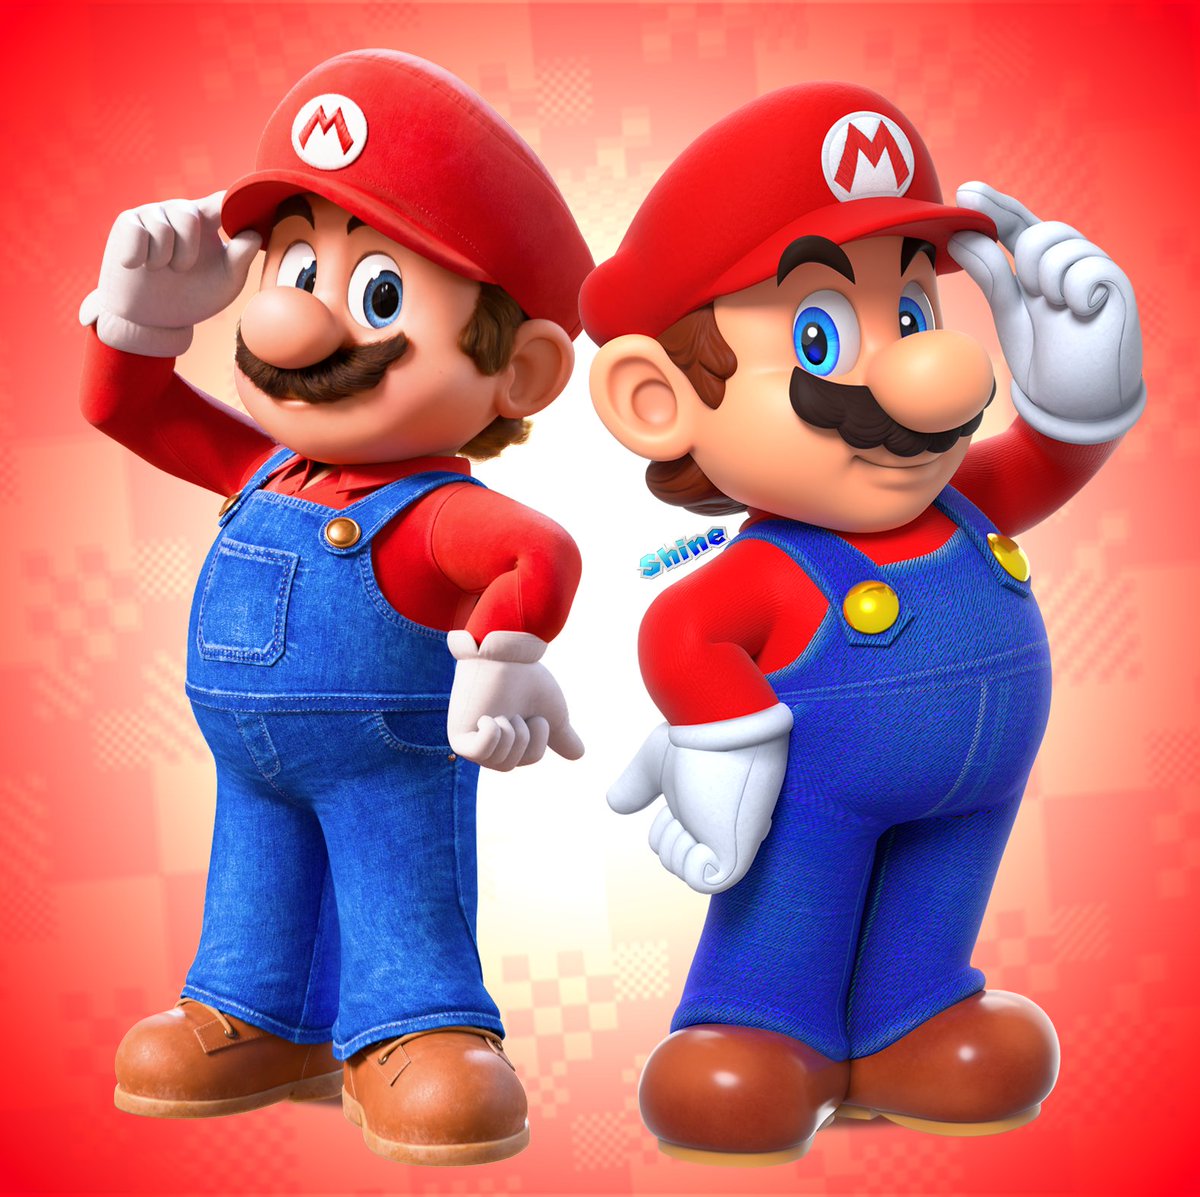 'Two Bros.'
#Mario #Nintendo #MarioMovie #Blender3D

Finally tried out @Awesome3D_'s rig!